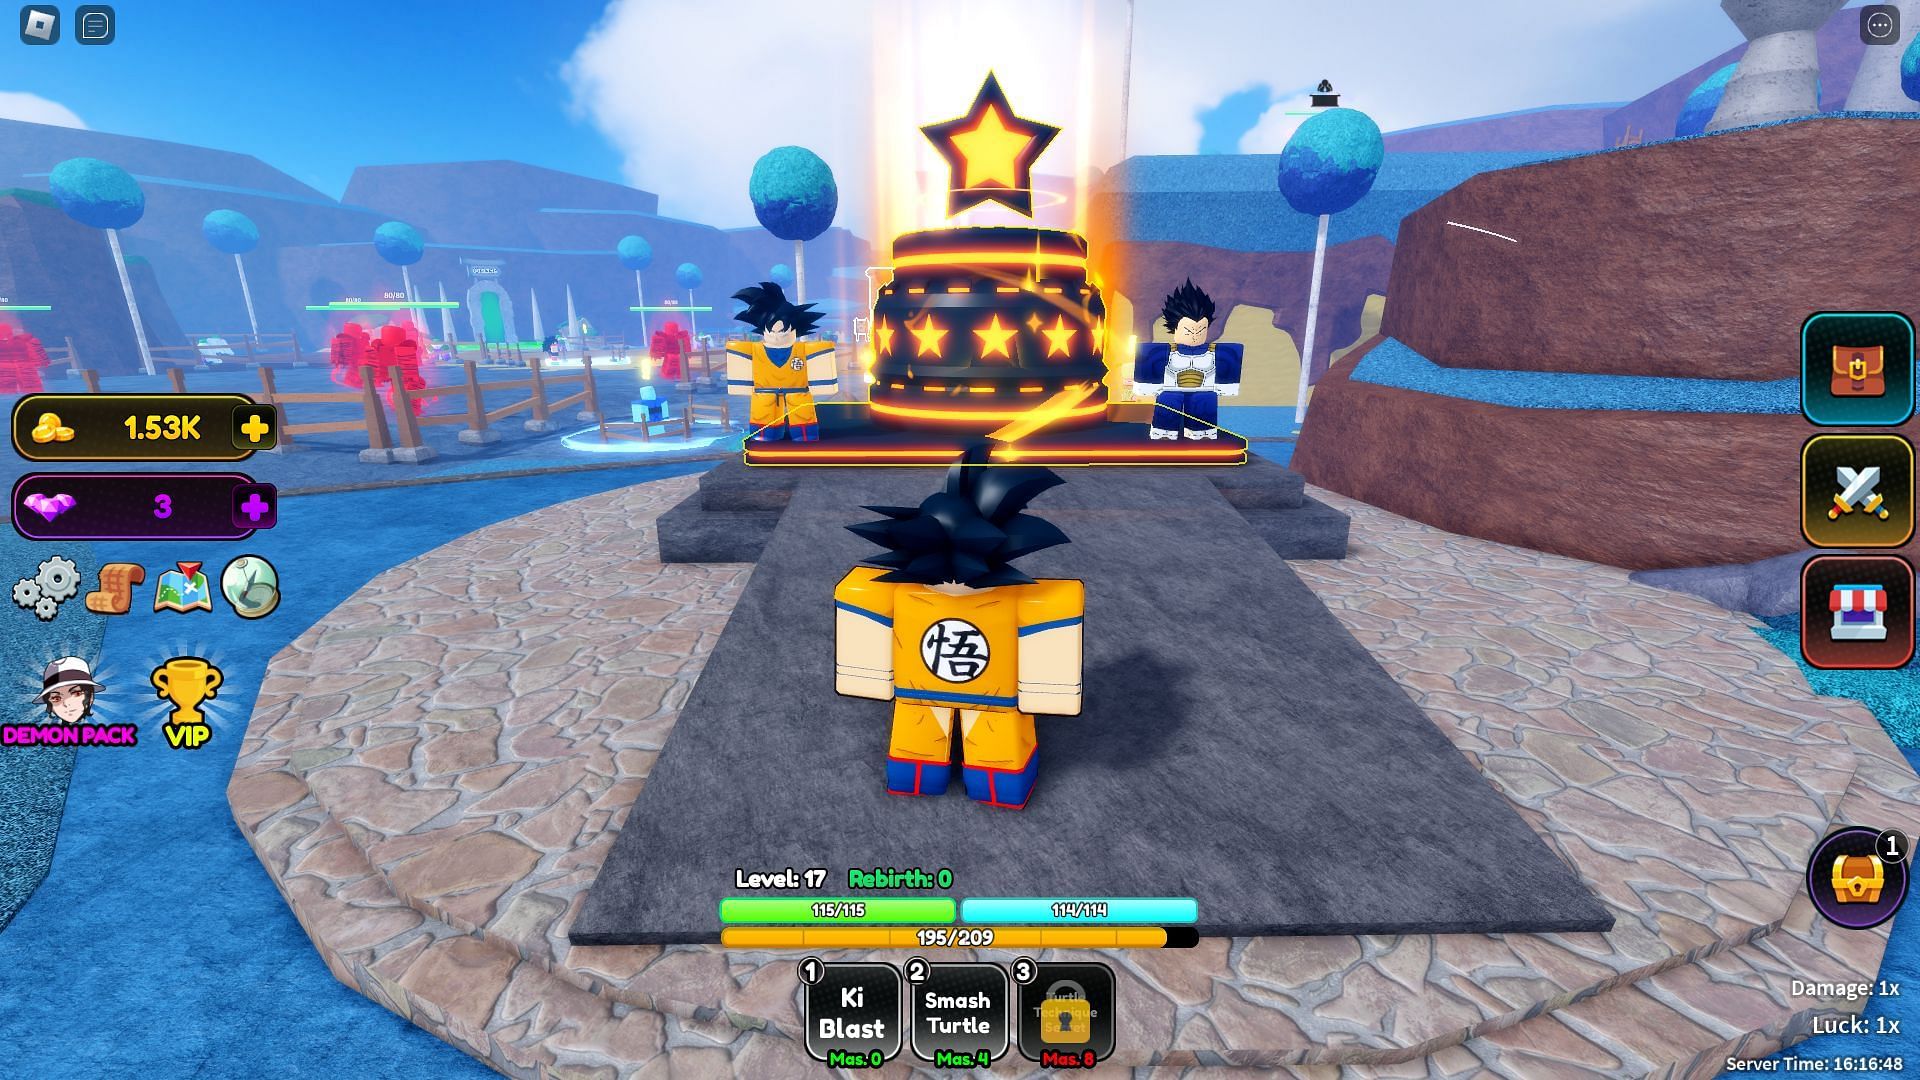 You can obtain new characters in Anime Collide by summoning them (Image via Roblox)